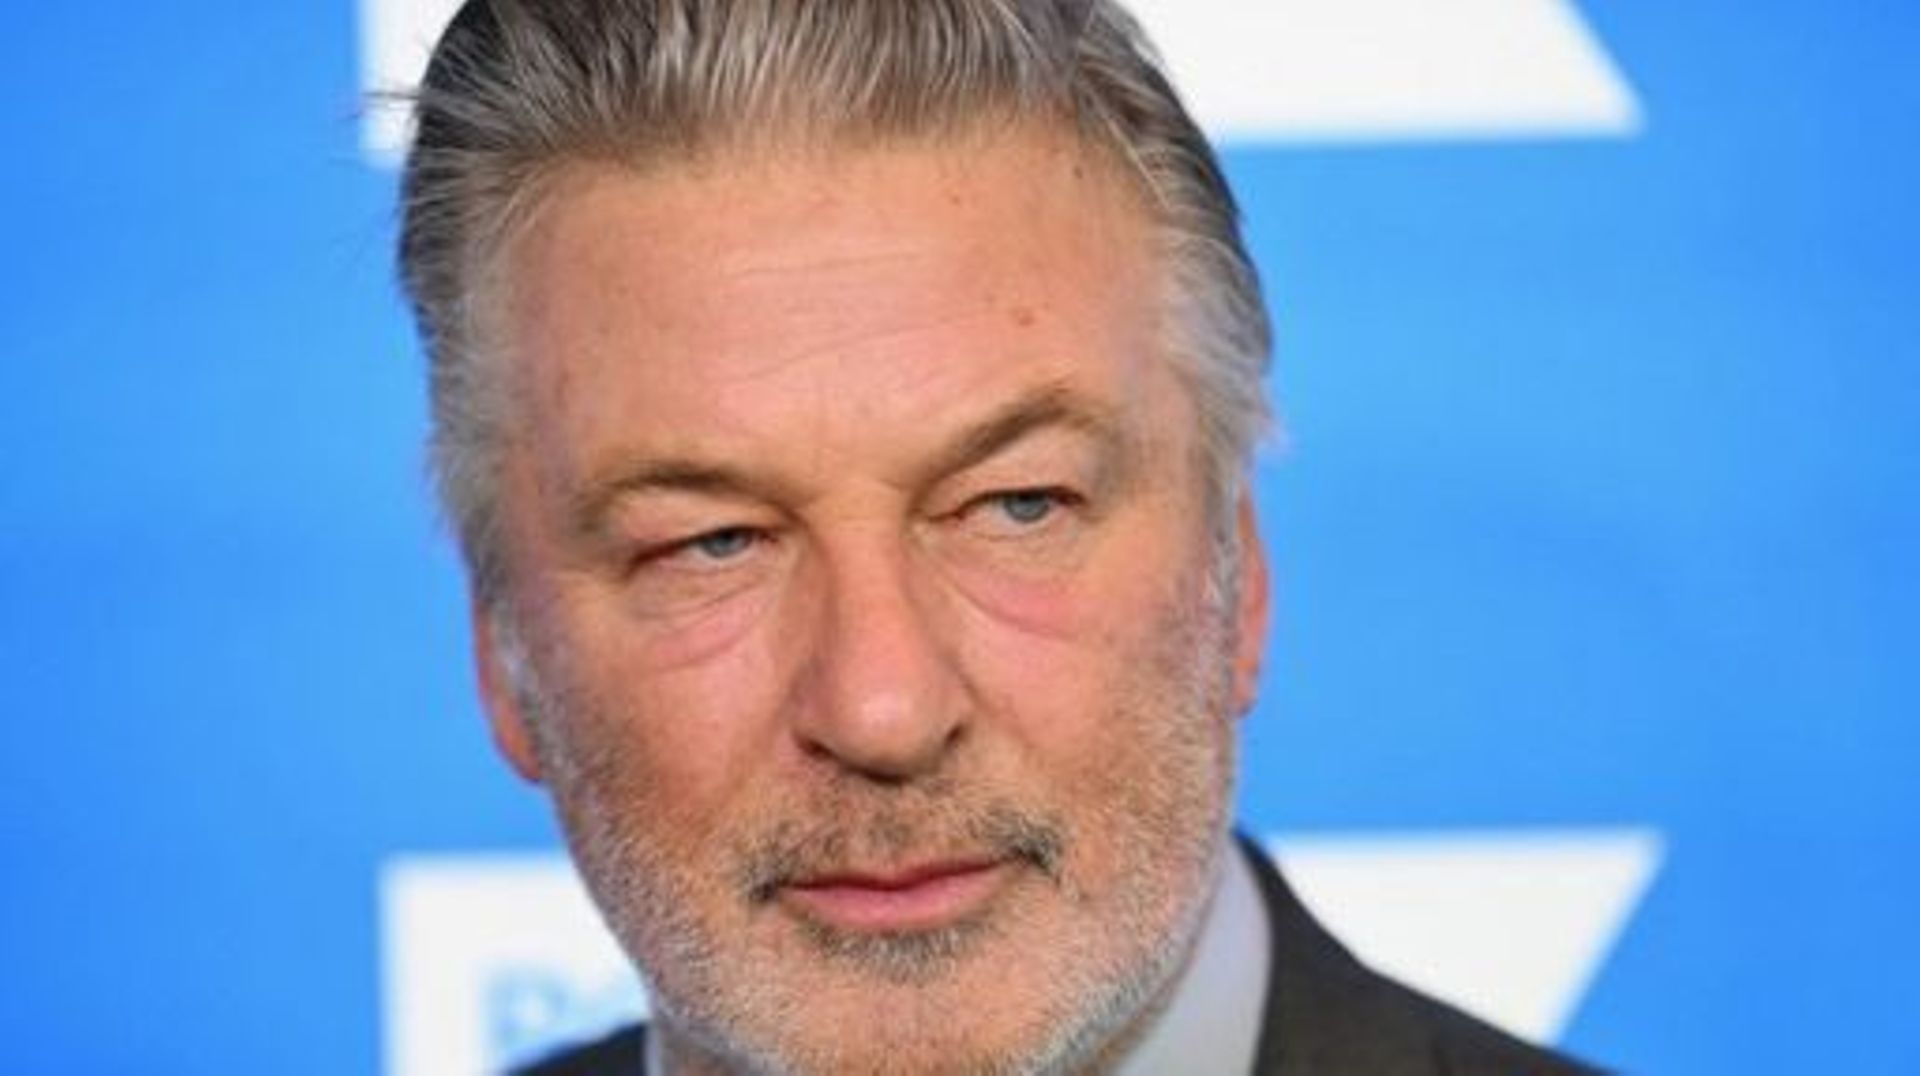 Actor Alec Baldwin arrives at the 2022 Robert F. Kennedy Human Rights Ripple of Hope Award Gala at the Hilton Midtown in New York on December 6, 2022. ANGELA WEISS / AFP